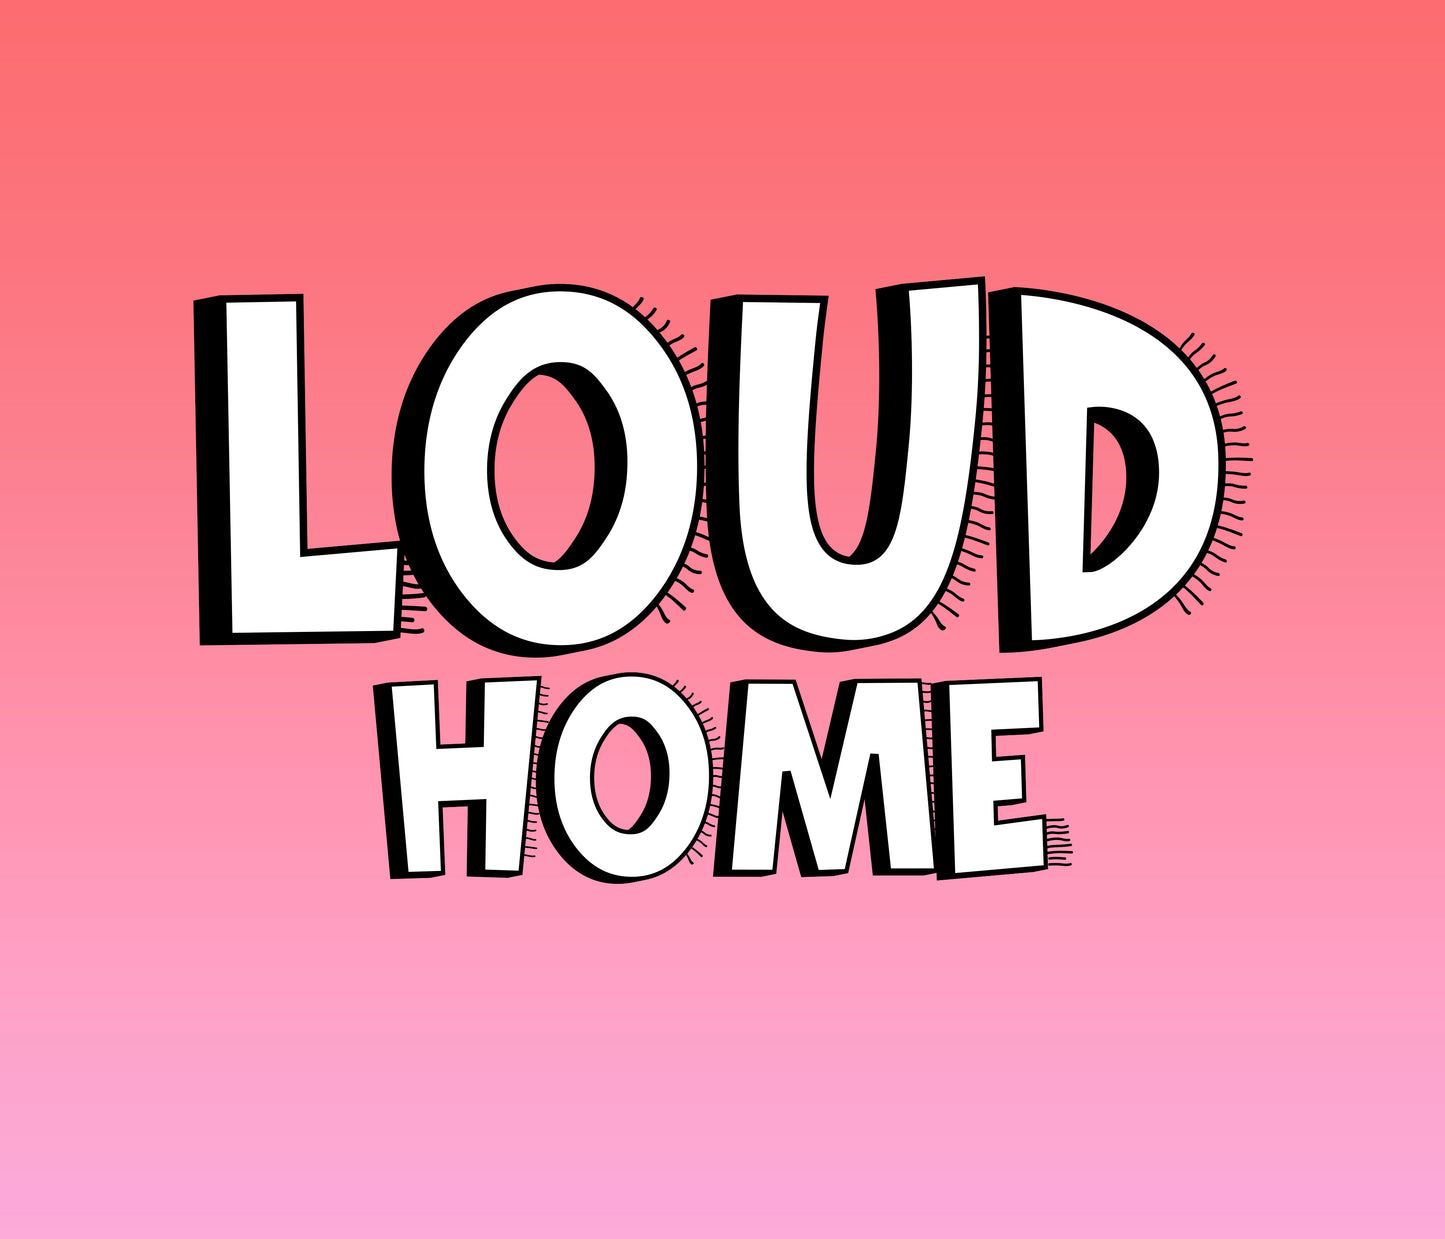 The Loud House Textured Font